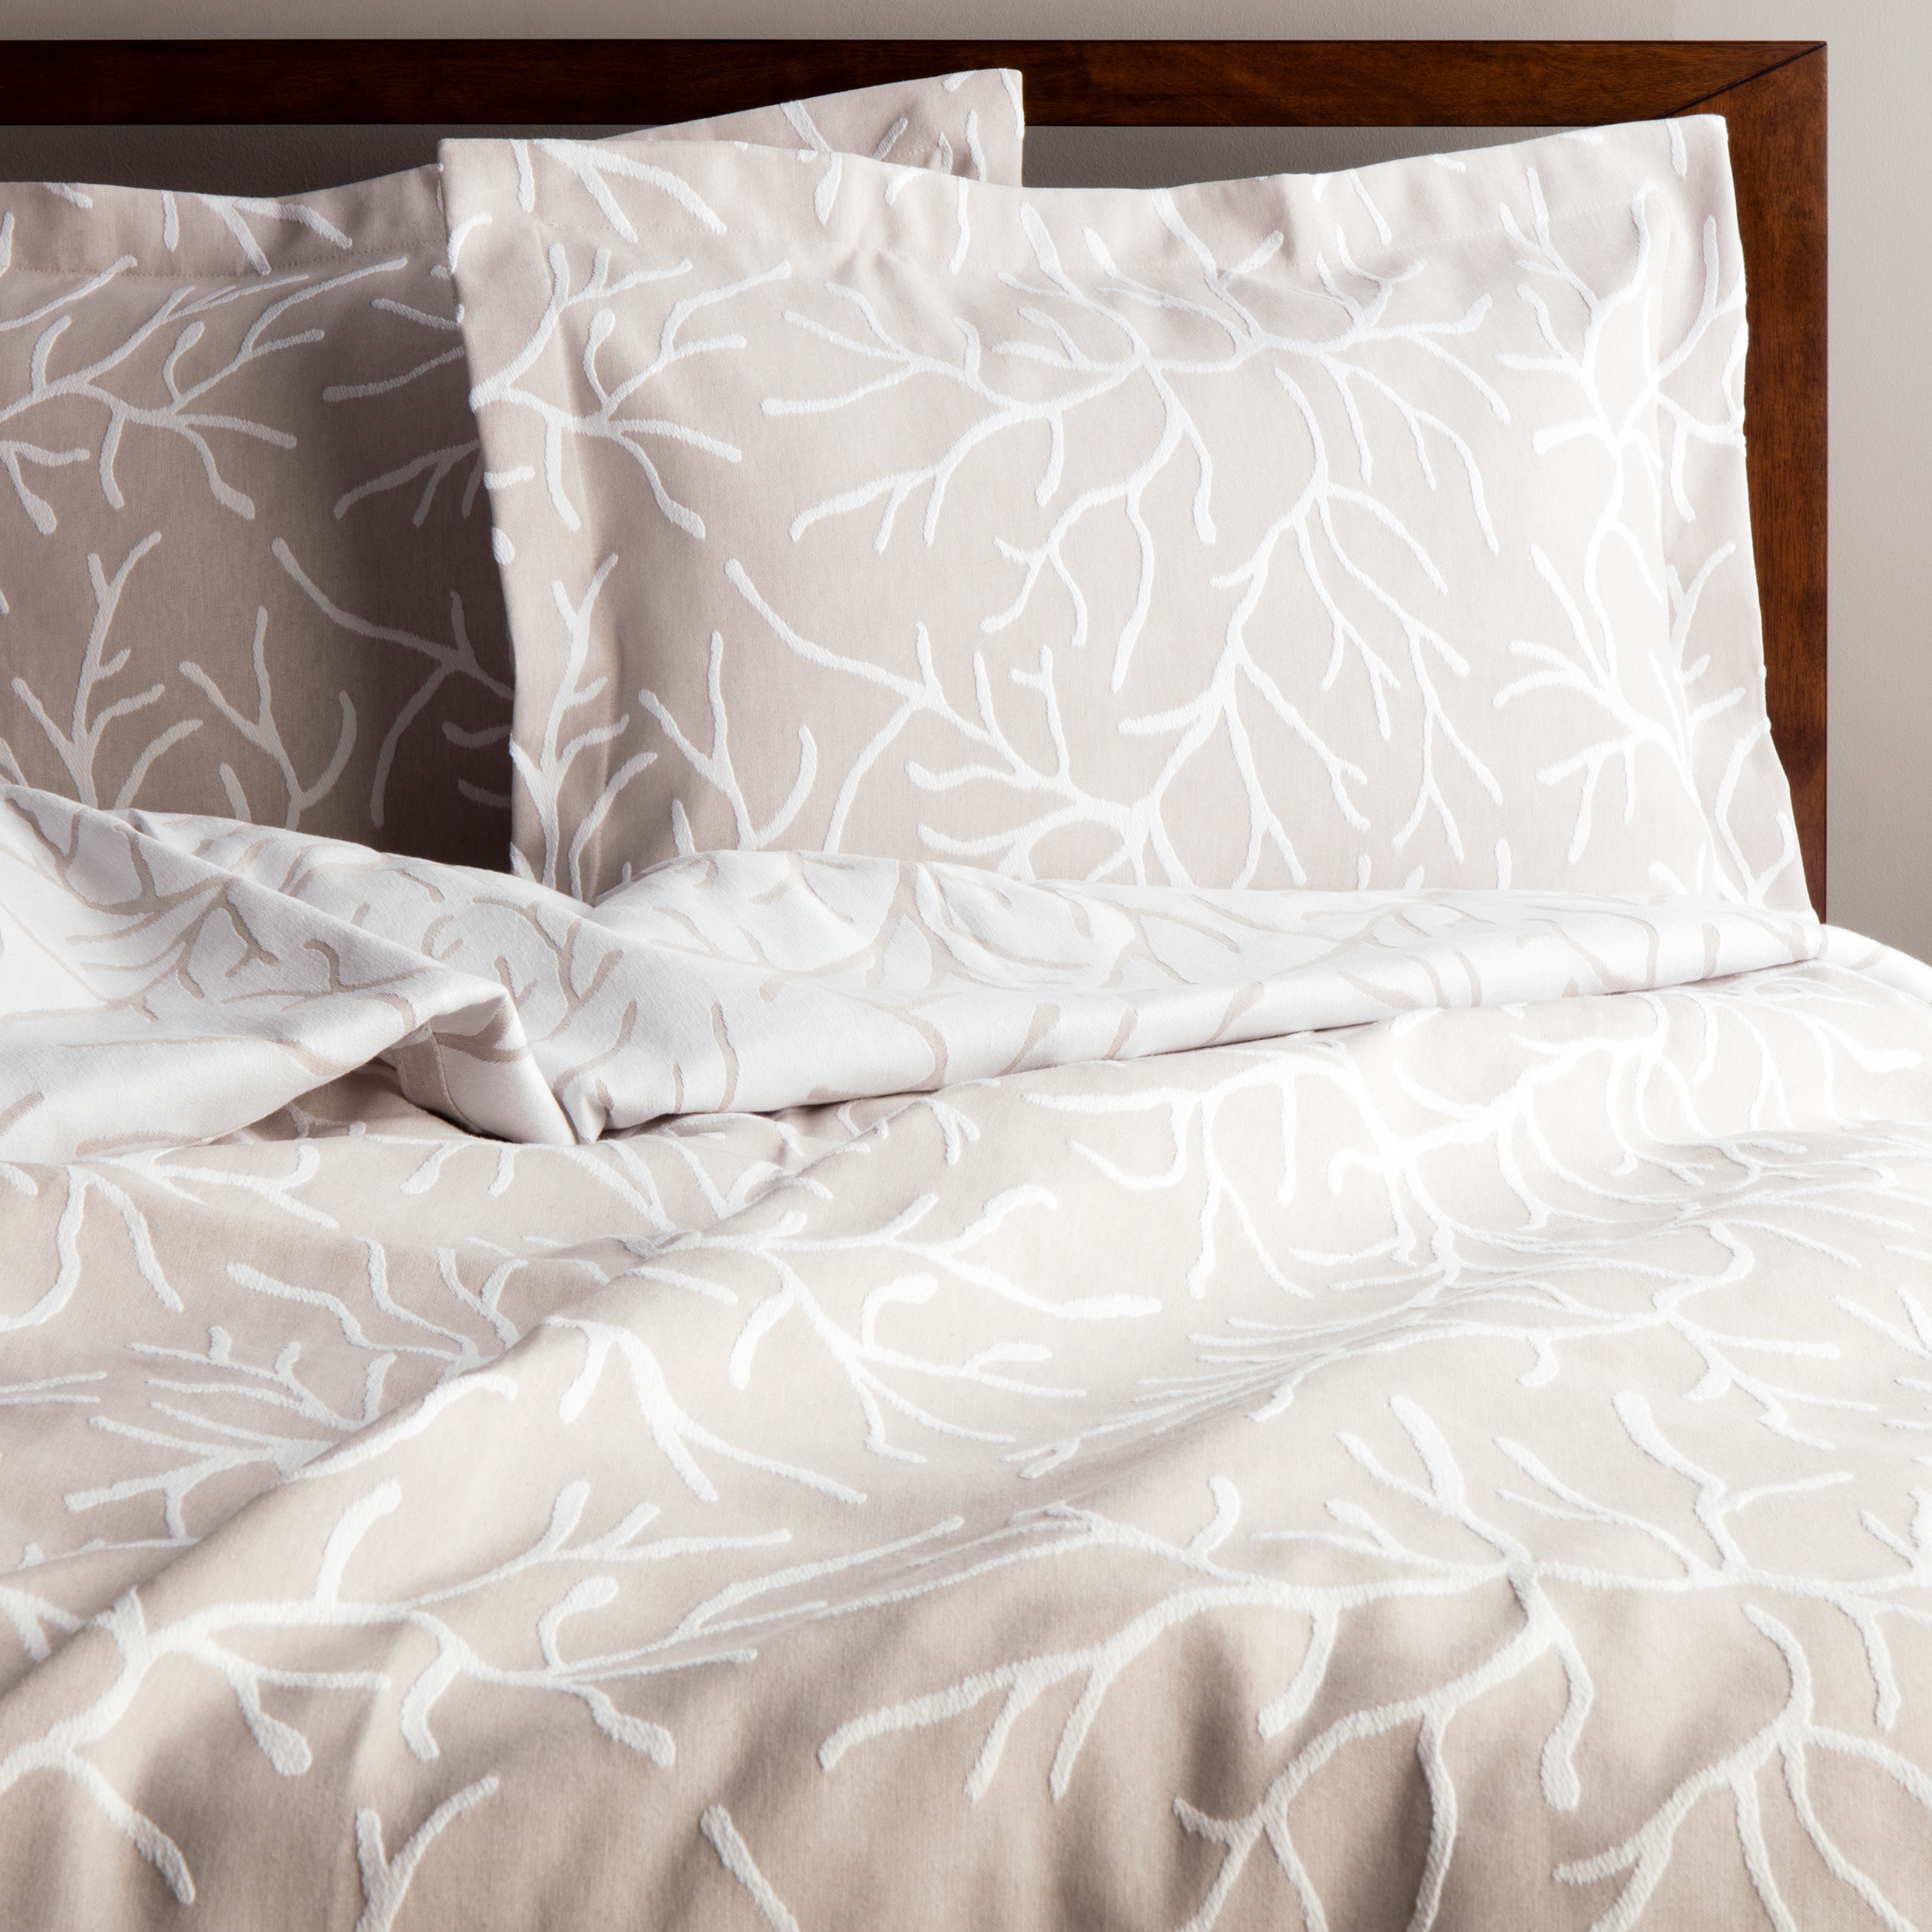 Shop Coral Glory Coverlet On Sale Overstock 11592340 Green